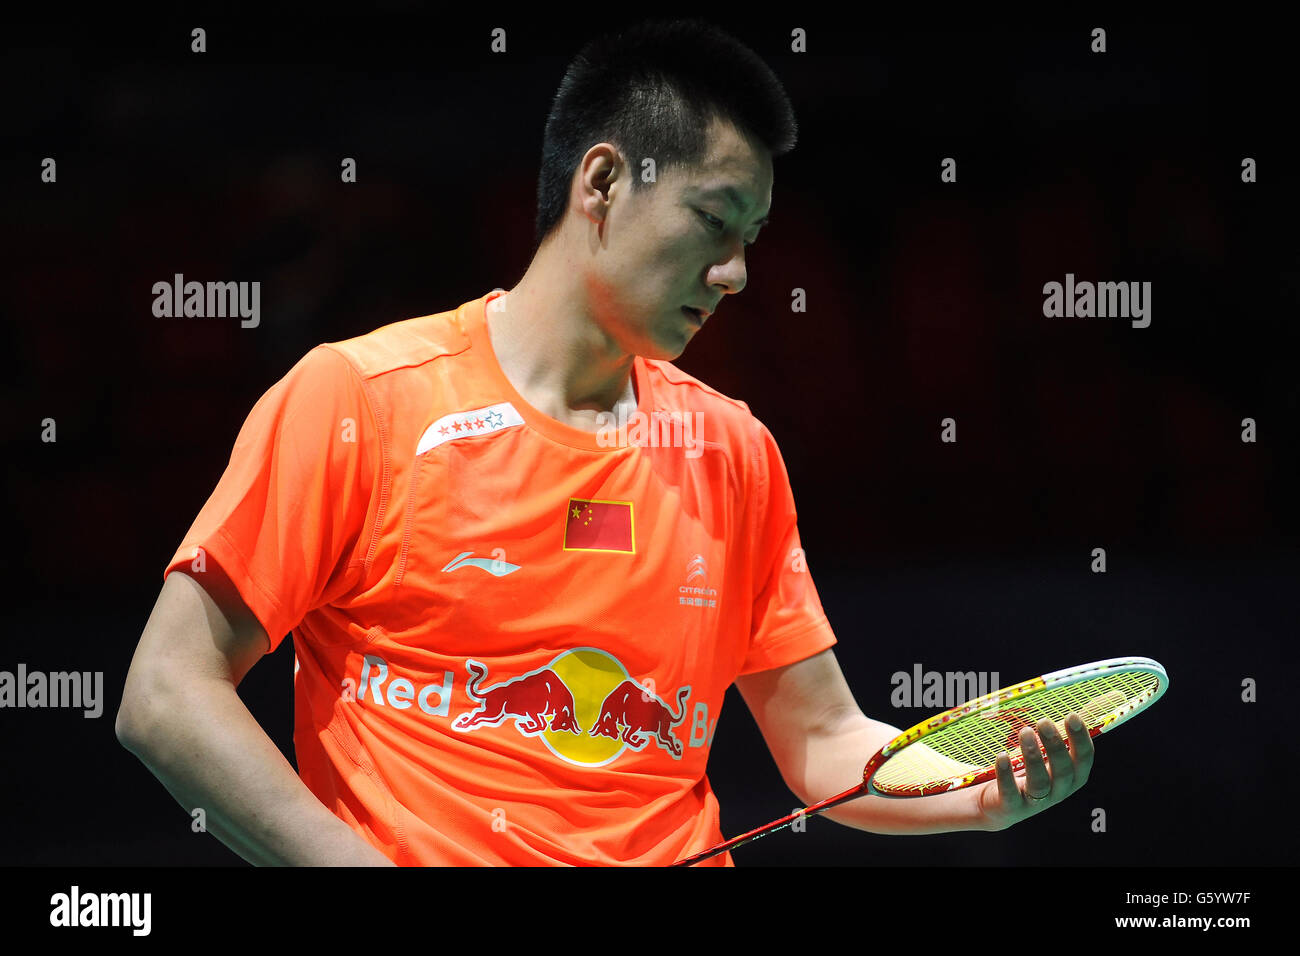 Badminton 2013 High Resolution Stock Photography and Images - Alamy